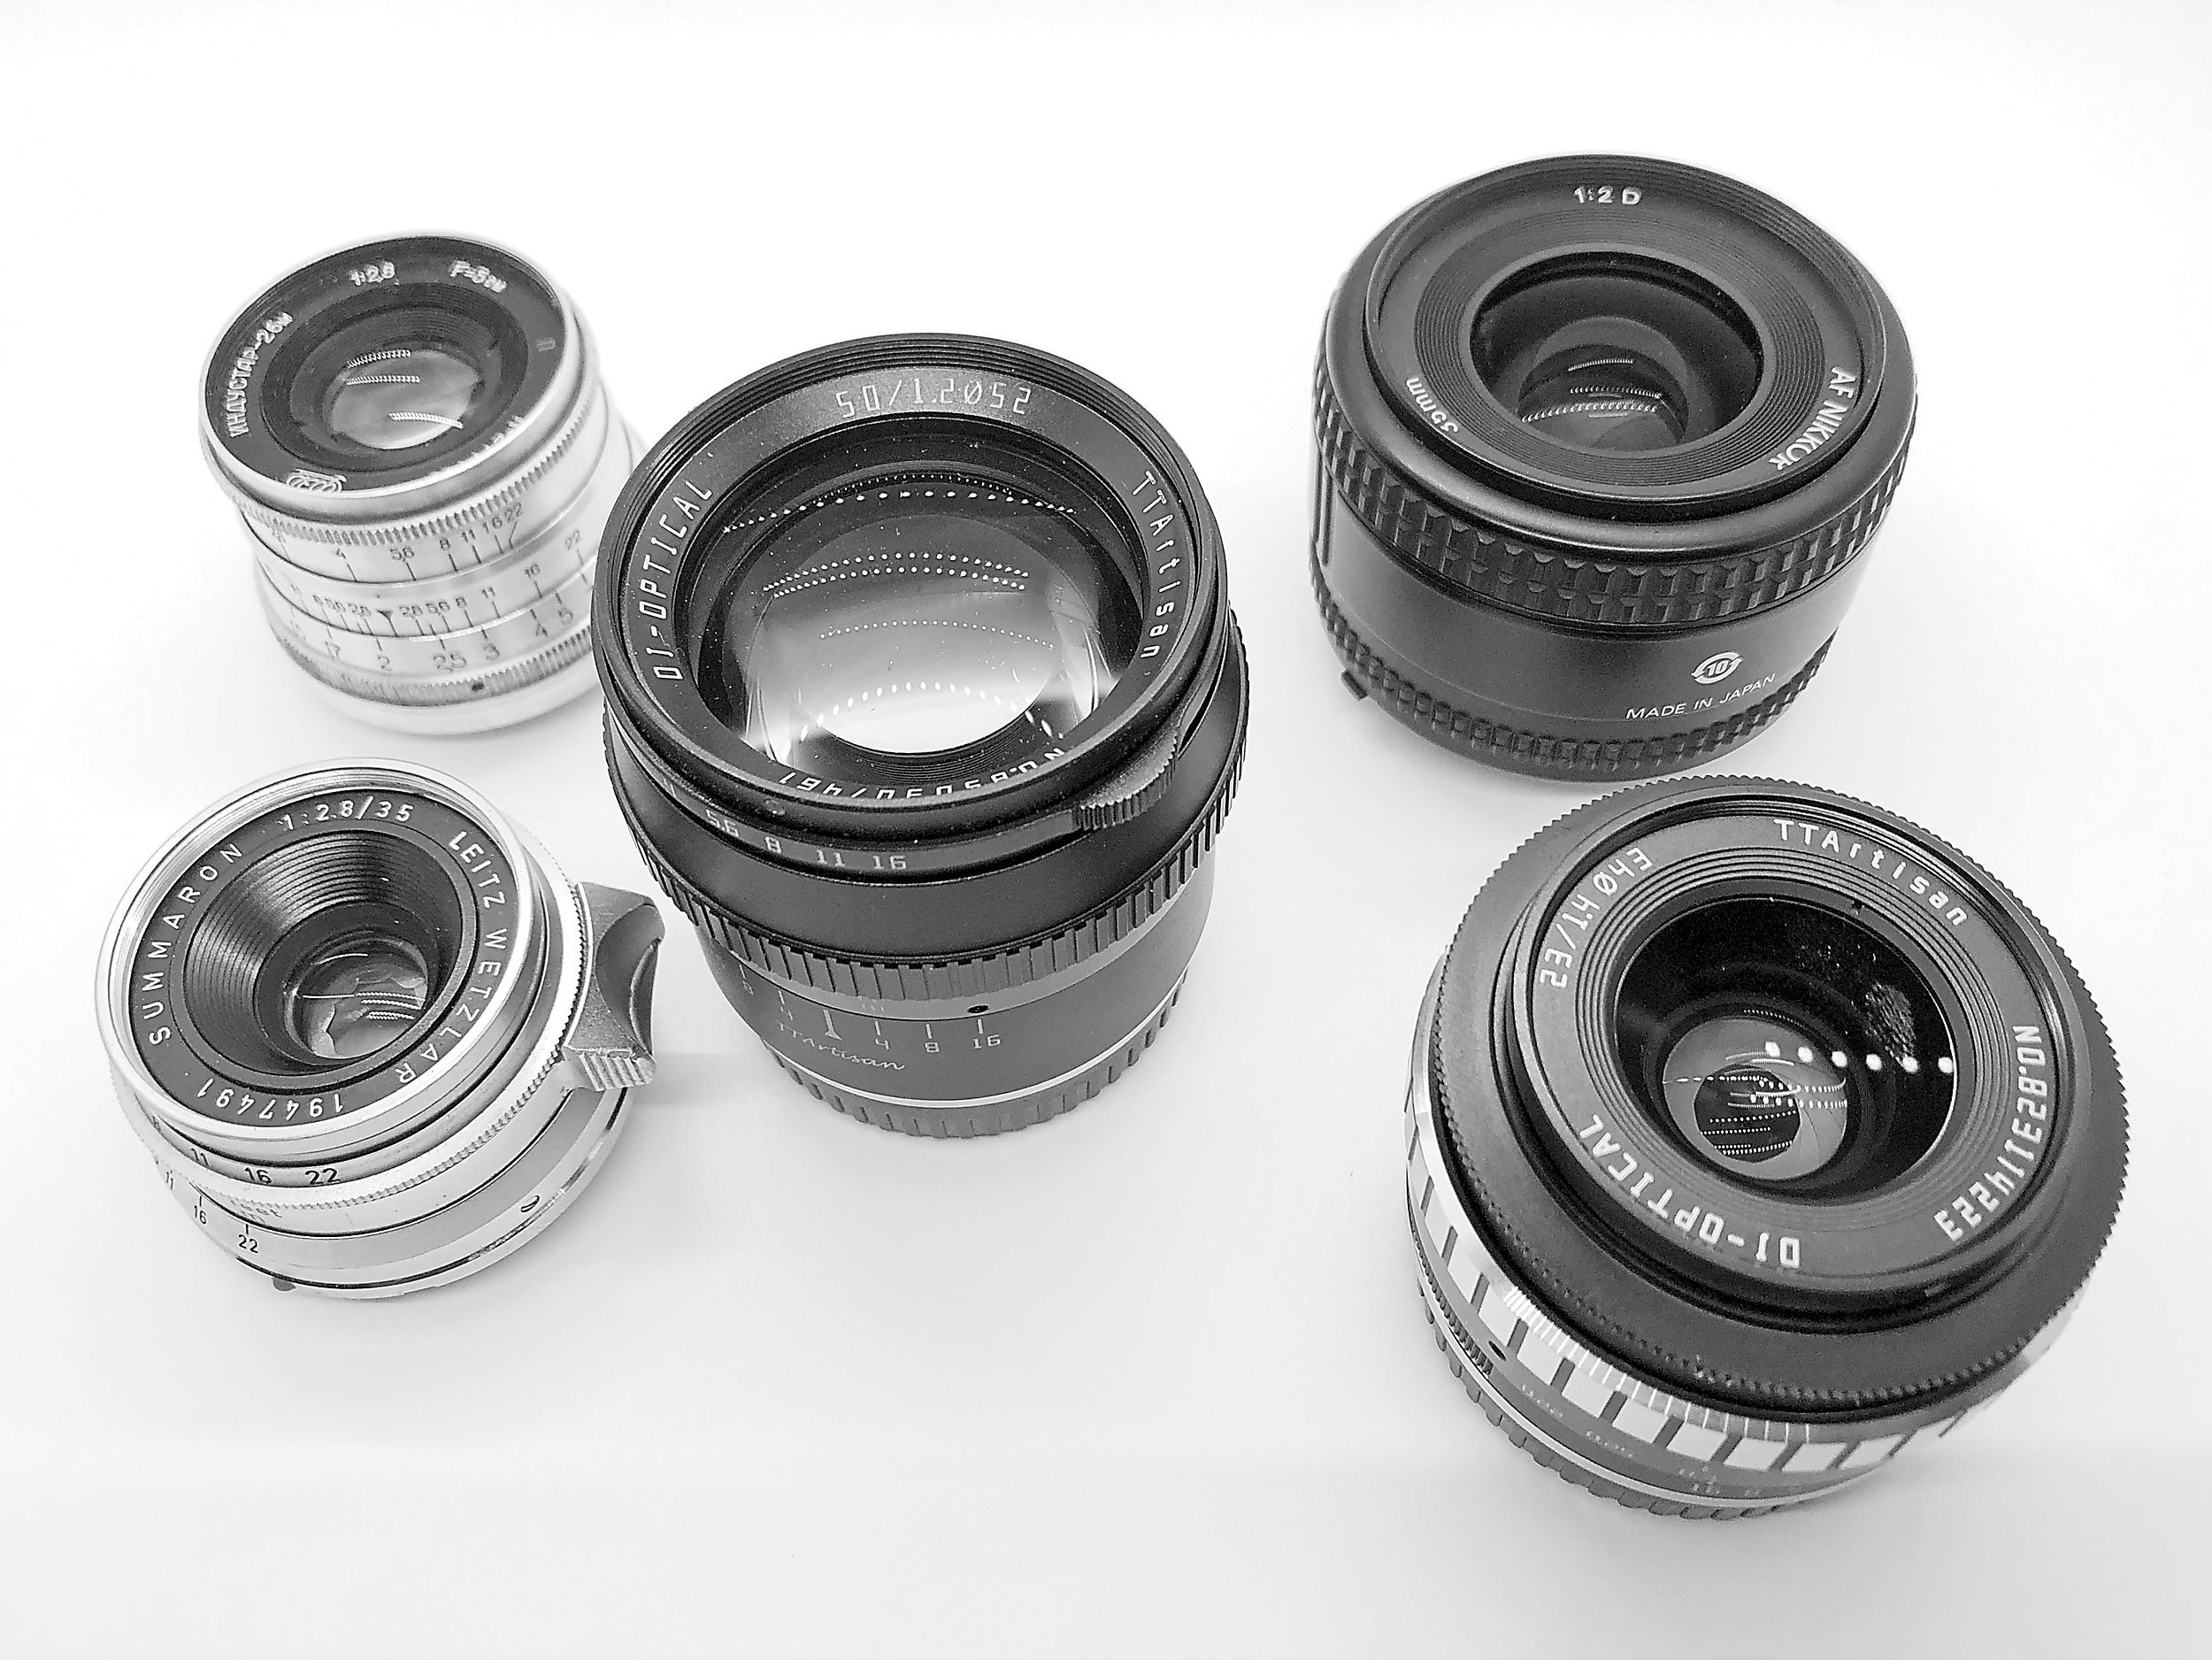 Behoefte aan Italiaans natuurkundige Manten|Photography — Why You Should Use Third-Party Lenses on Fujifilm  X-Series Cameras